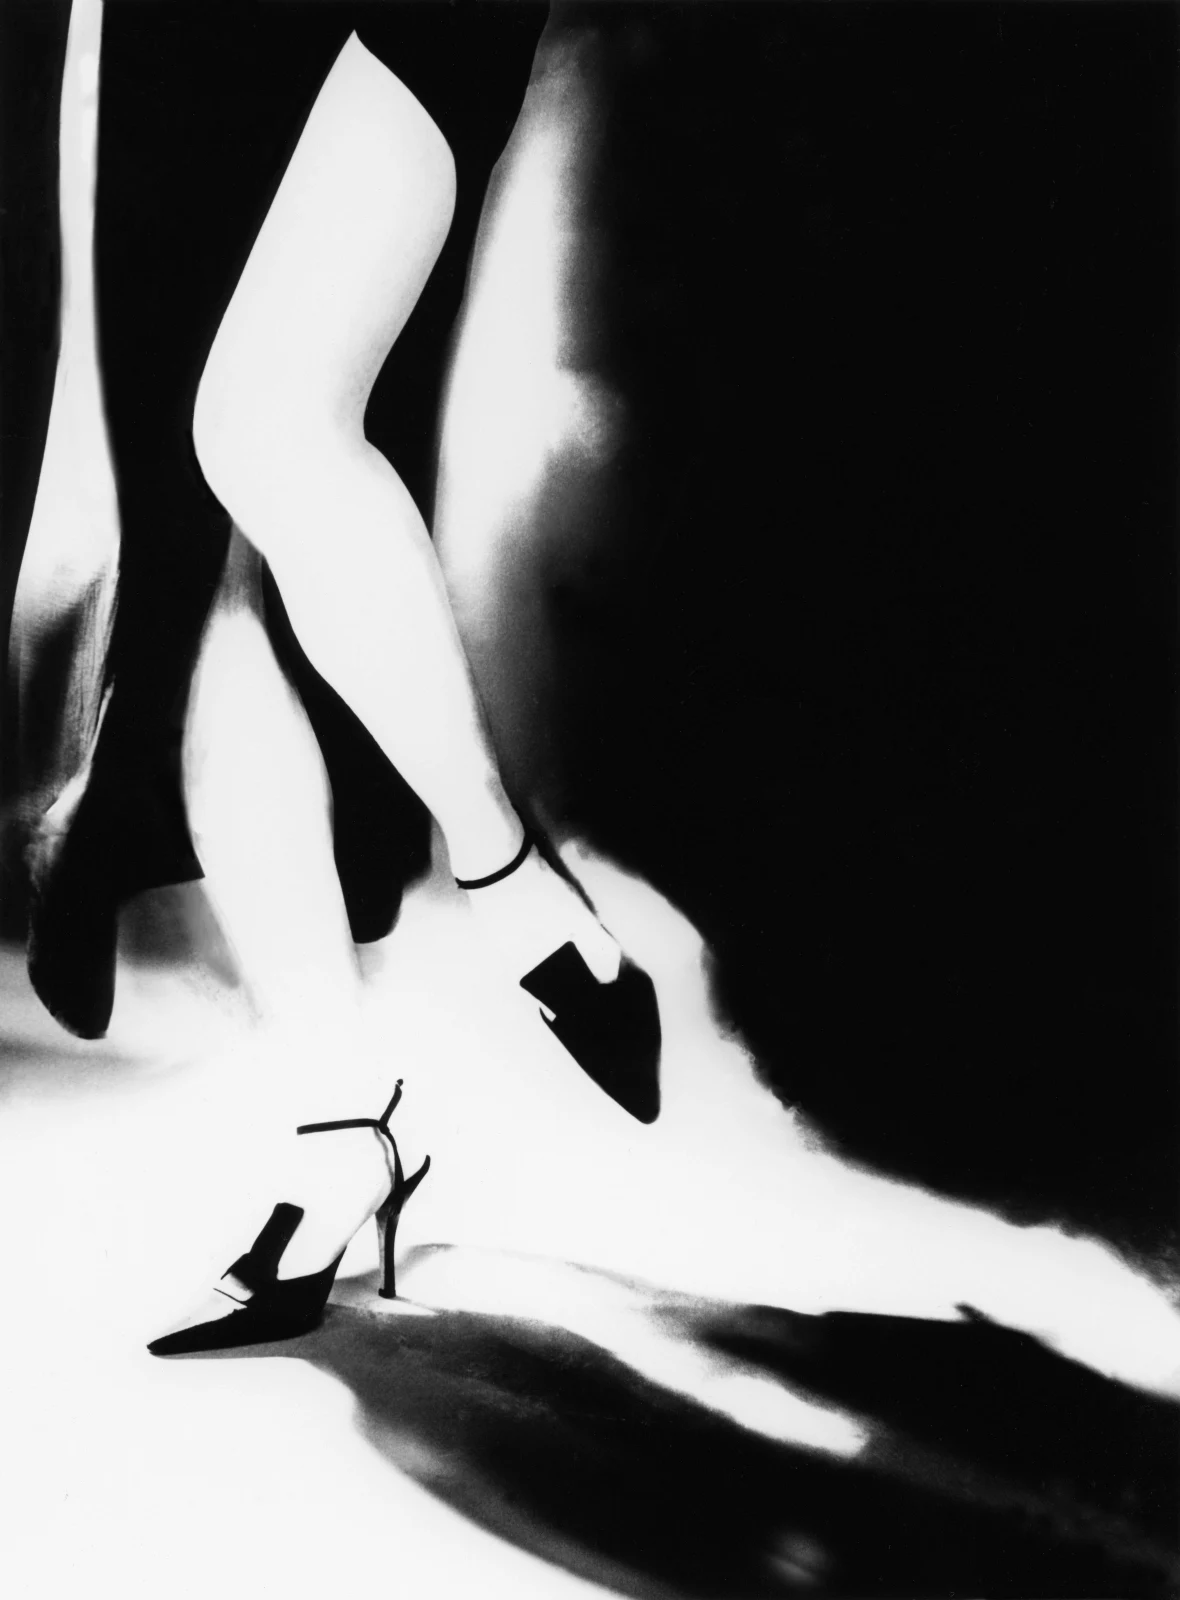 About the Artwork Bassman Lillian. Ra Moda E Arte, Teresa, Gown by Laura Biagiotti and Shoes by Romeo Gigli, 1996  by Lillian Bassman